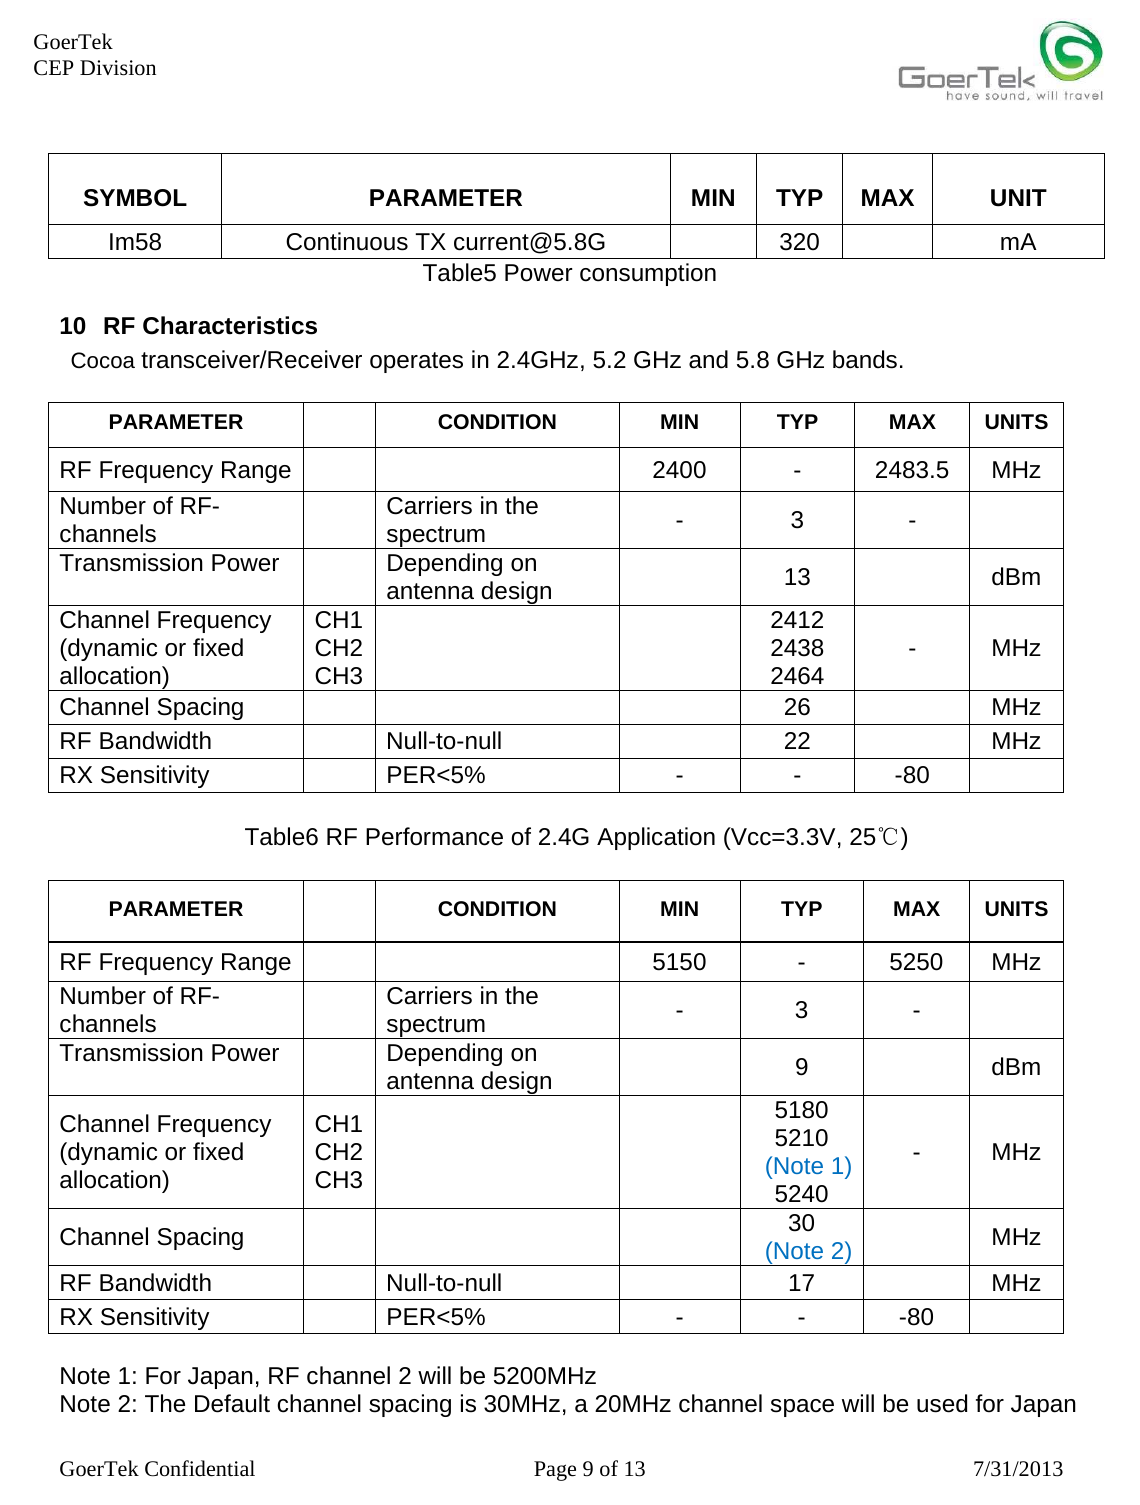     GoerTek Confidential  Page 9 of 13  7/31/2013 GoerTek  CEP Division SYMBOL PARAMETER MIN TYP MAX UNIT Im58 Continuous TX current@5.8G  320  mA Table5 Power consumption 10 RF Characteristics  Cocoa transceiver/Receiver operates in 2.4GHz, 5.2 GHz and 5.8 GHz bands.  PARAMETER  CONDITION  MIN TYP MAX UNITS RF Frequency Range      2400  -  2483.5  MHz Number of RF-channels   Carriers in the spectrum  - 3 -  Transmission Power      Depending on antenna design   13  dBm Channel Frequency (dynamic or fixed allocation) CH1 CH2 CH3    2412 2438 2464  - MHz Channel Spacing        26    MHz RF Bandwidth    Null-to-null    22    MHz RX Sensitivity    PER&lt;5%  -  -  -80      Table6 RF Performance of 2.4G Application (Vcc=3.3V, 25℃)  PARAMETER  CONDITION  MIN TYP MAX UNITS RF Frequency Range      5150  -  5250  MHz Number of RF-channels   Carriers in the spectrum  - 3 -  Transmission Power   Depending on antenna design   9  dBm Channel Frequency (dynamic or fixed allocation) CH1 CH2 CH3    5180 5210   (Note 1) 5240 - MHz Channel Spacing        30   (Note 2)  MHz RF Bandwidth    Null-to-null    17    MHz RX Sensitivity    PER&lt;5%  -  -  -80    Note 1: For Japan, RF channel 2 will be 5200MHz Note 2: The Default channel spacing is 30MHz, a 20MHz channel space will be used for Japan  